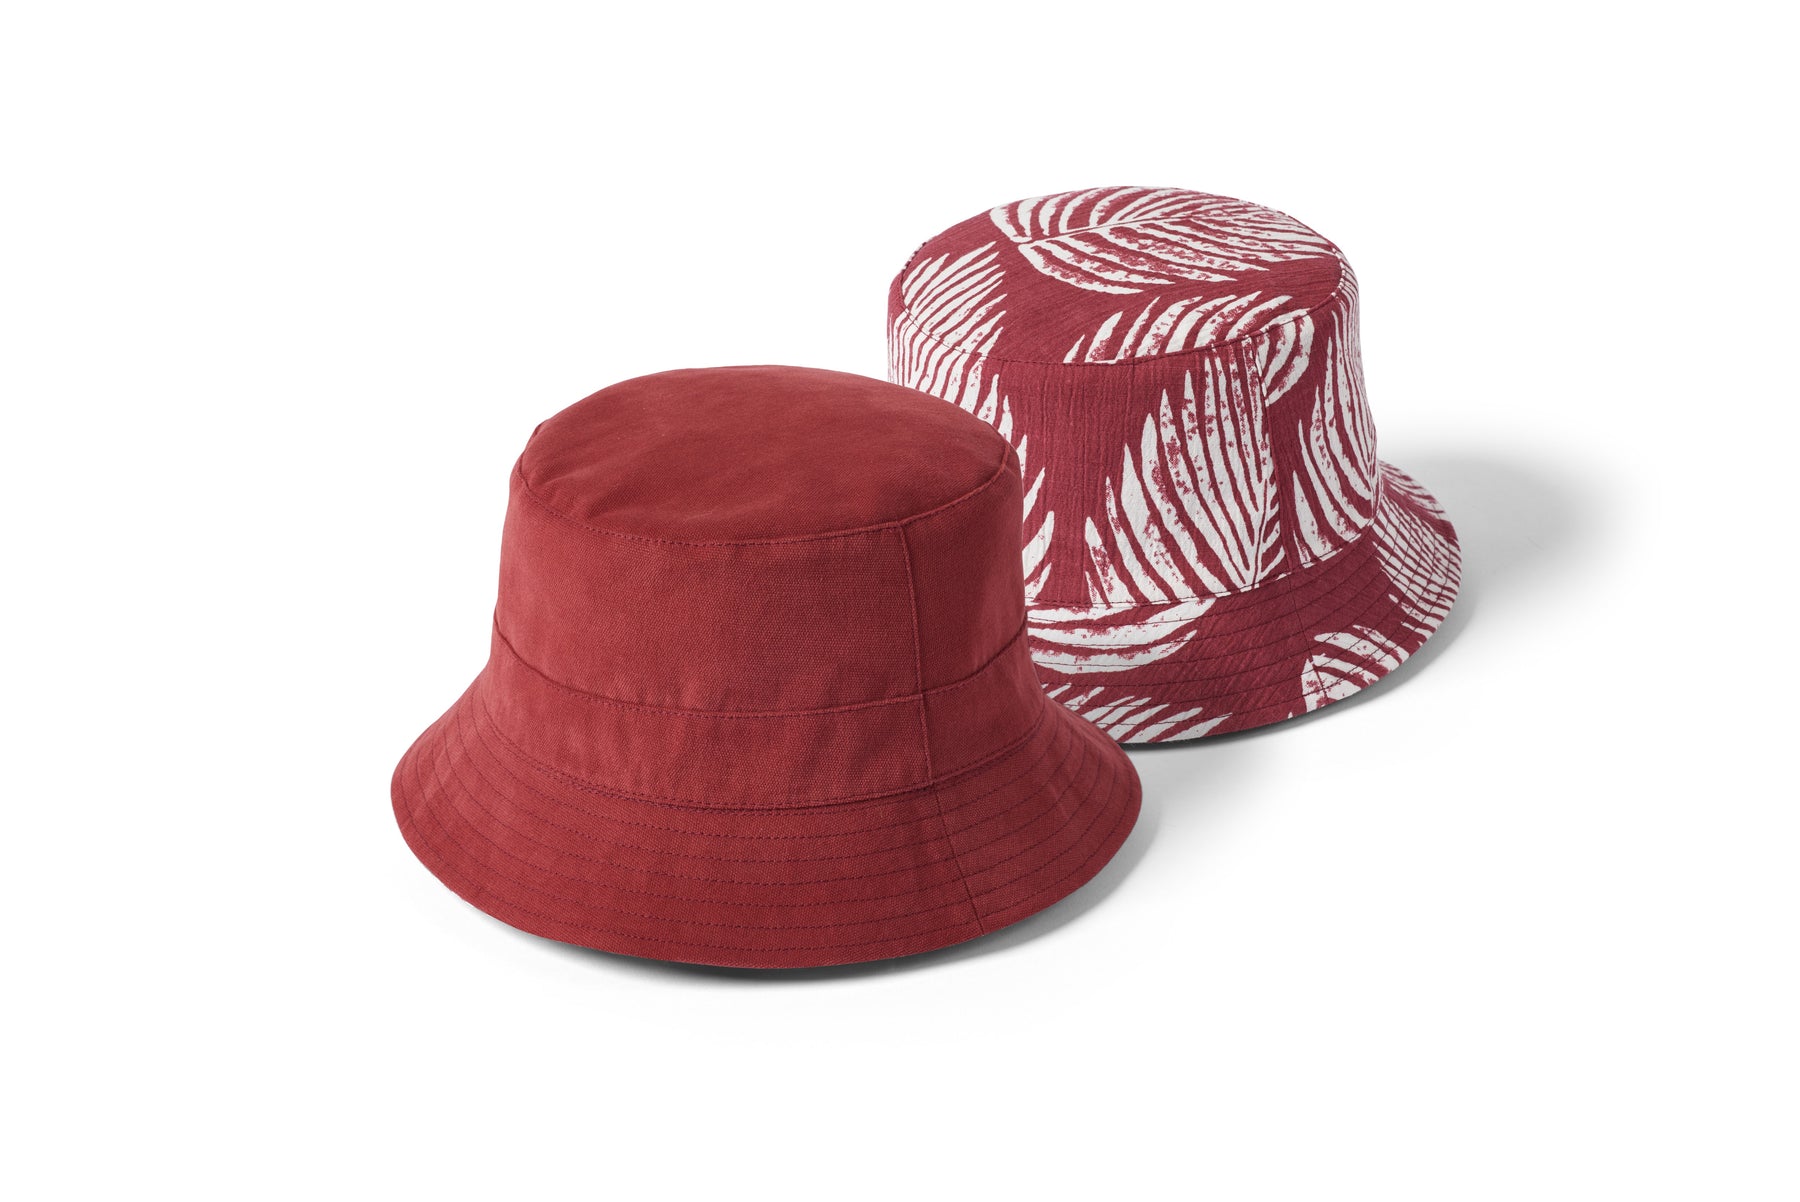 Failsworth Reversible Bucket Hat: A Modern Take on a Classic Design